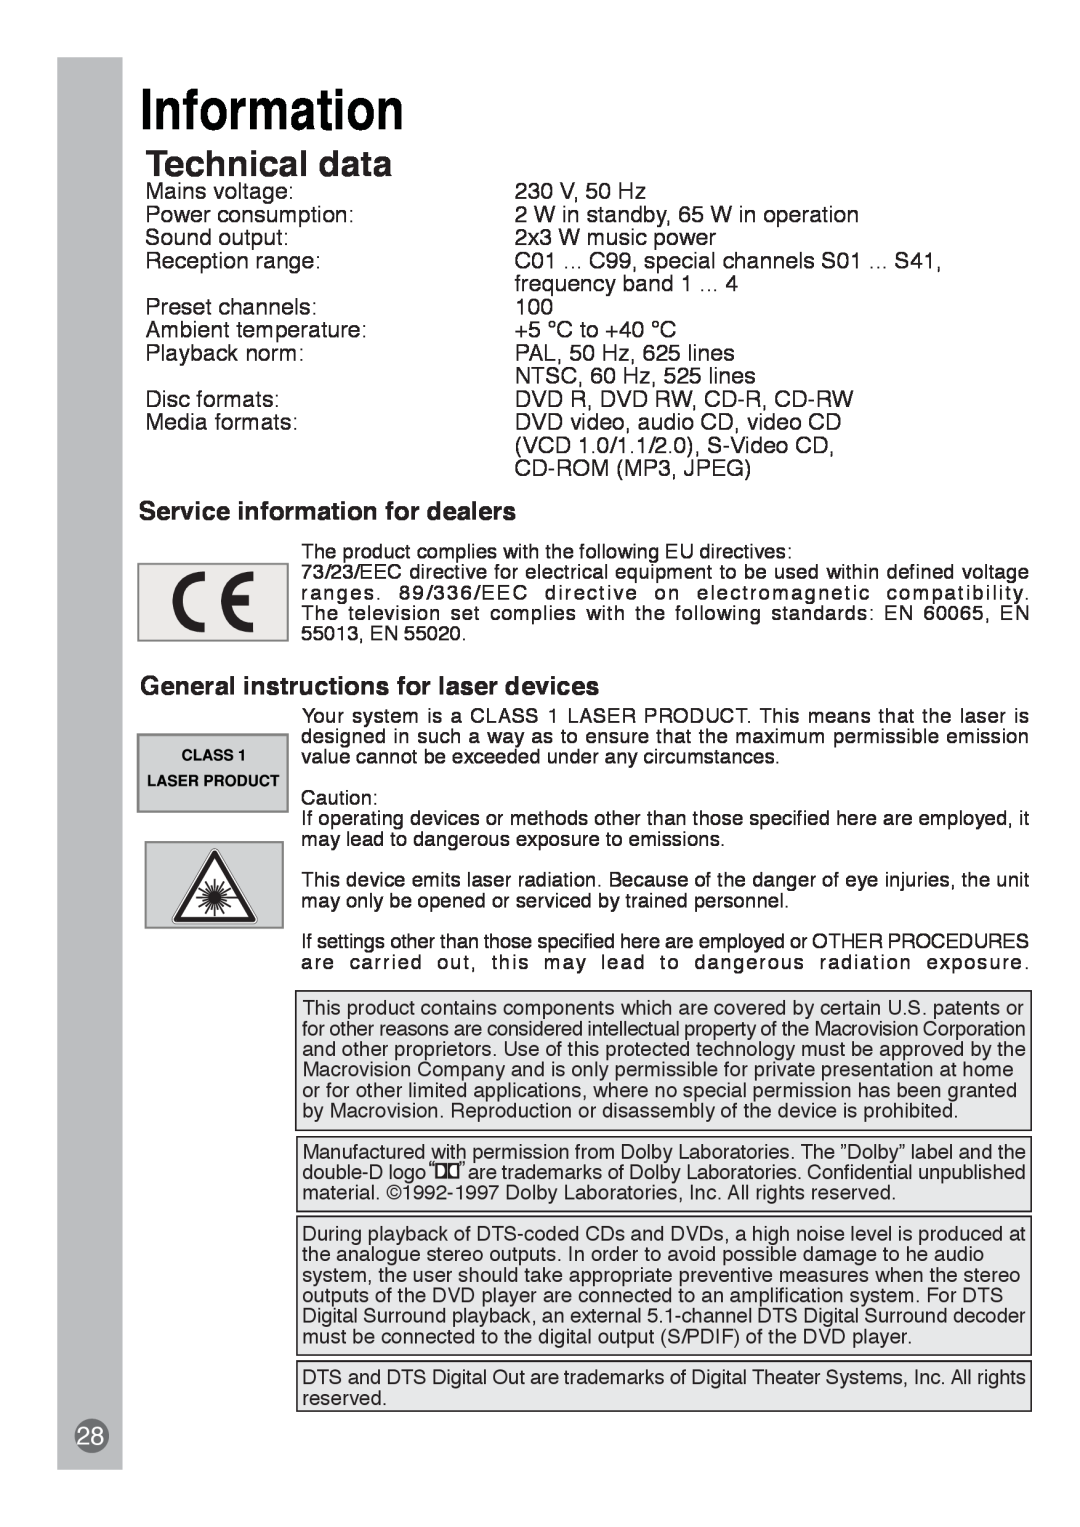 Beko E5 manual Information, Technical data, Service information for dealers, General instructions for laser devices 